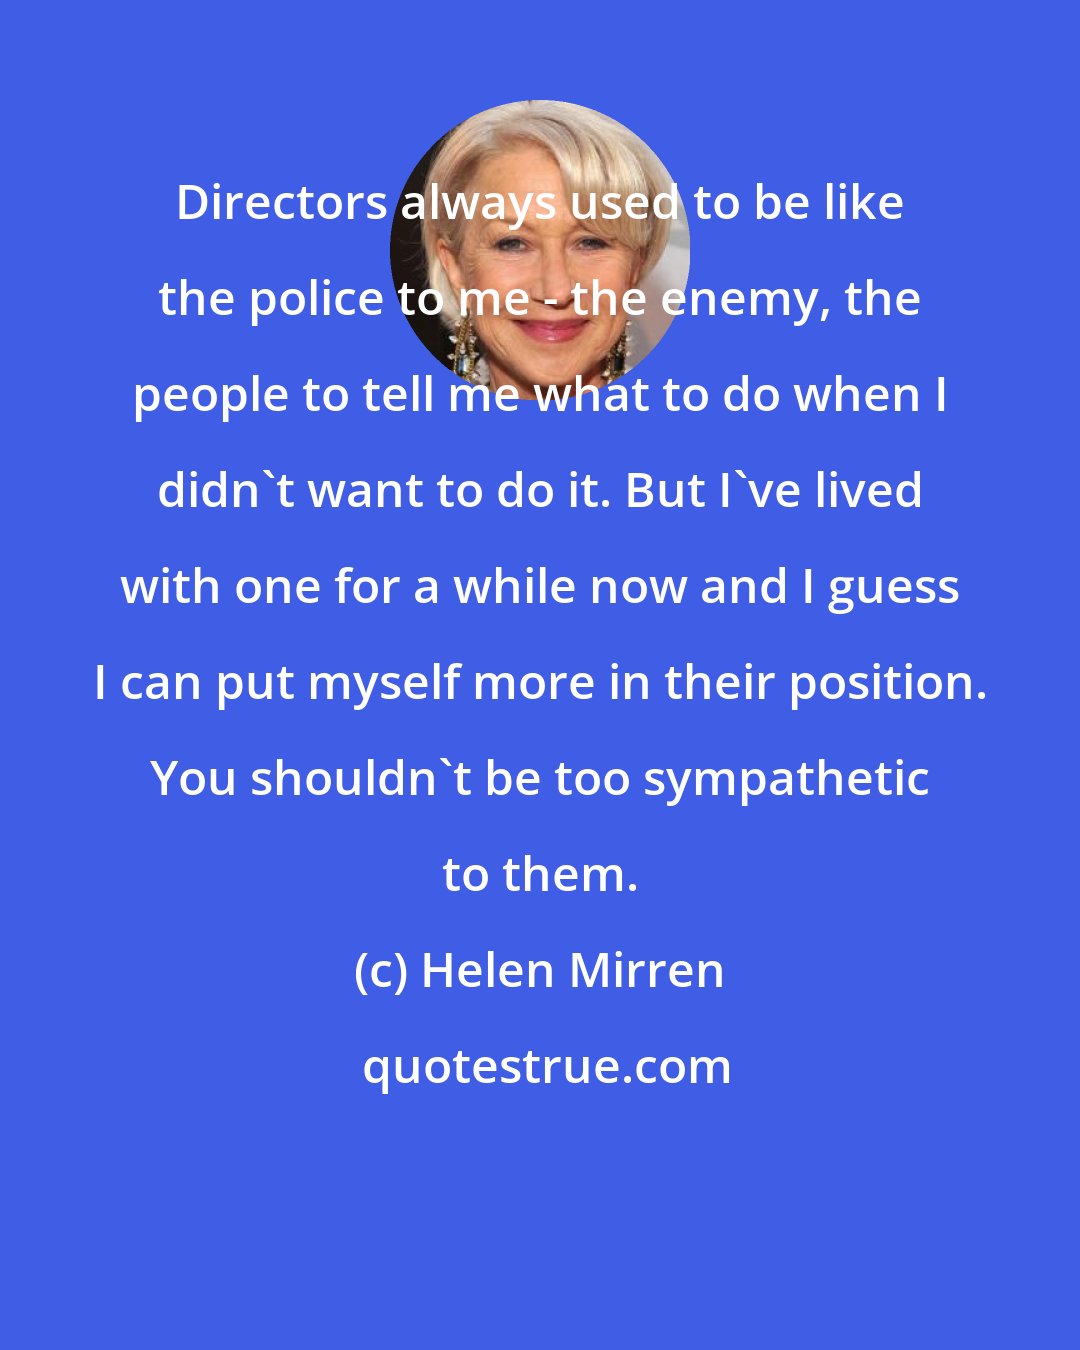 Helen Mirren: Directors always used to be like the police to me - the enemy, the people to tell me what to do when I didn't want to do it. But I've lived with one for a while now and I guess I can put myself more in their position. You shouldn't be too sympathetic to them.